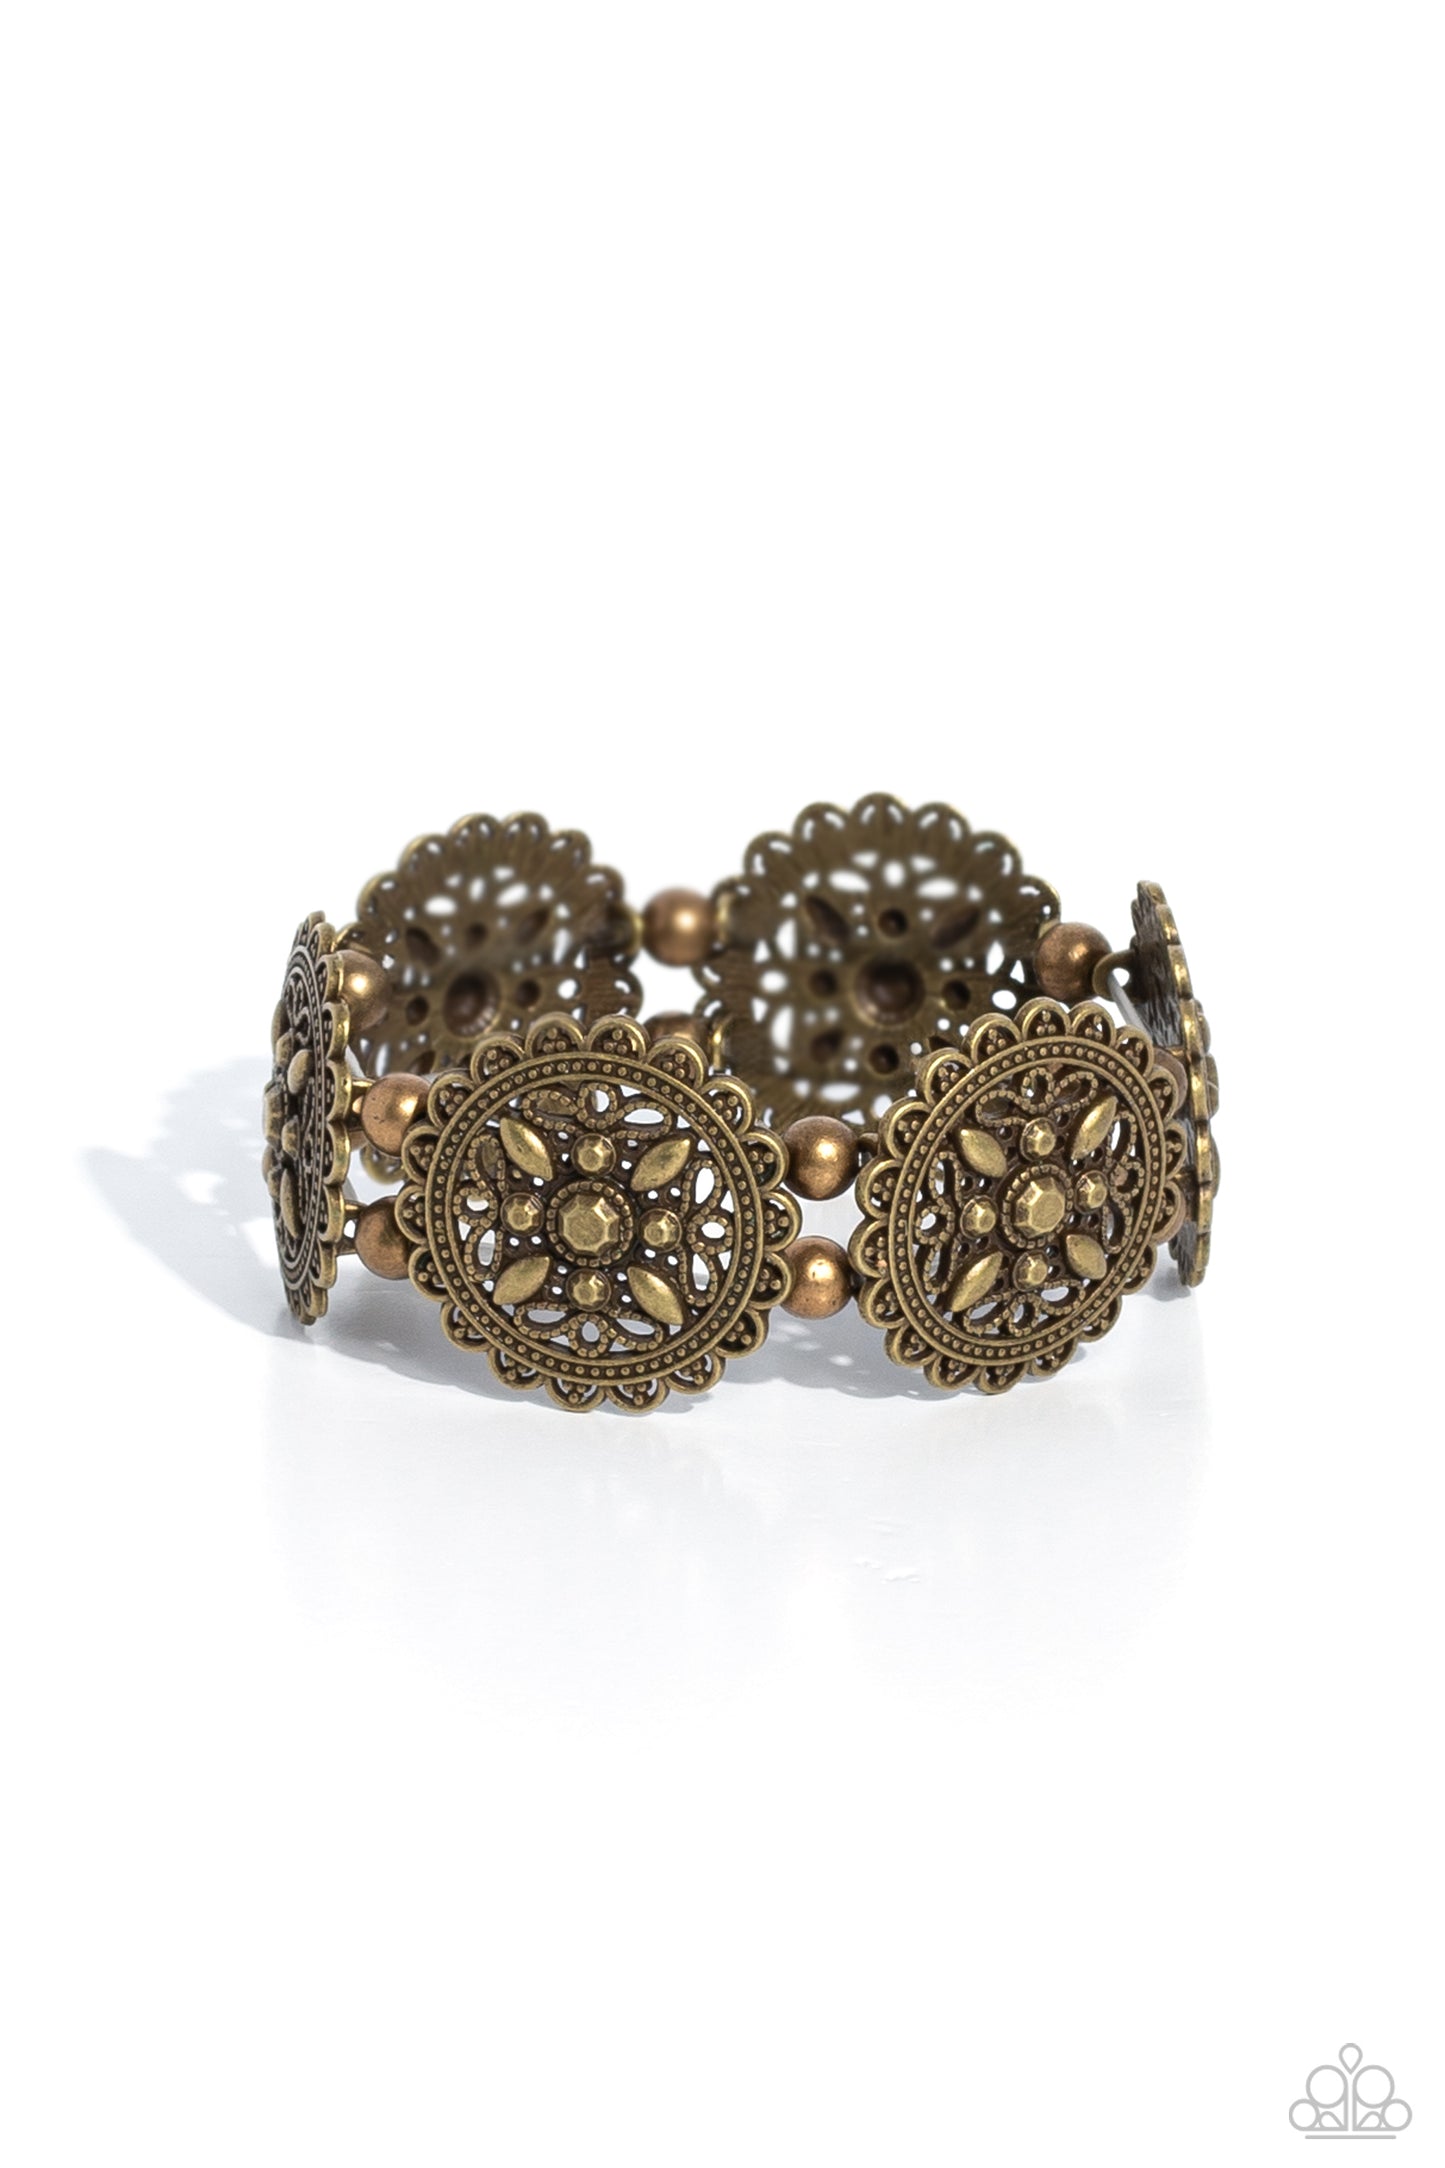 Paparazzi Accessories - Leave of Lace - Brass Bracelets filled with lace-like filigree, an antiqued collection of brass circular frames are delicately threaded along stretchy bands around the wrist for a whimsically vintage look. High-sheen brass beads separate each floral filigree disc for additional monochromatic glow.  Sold as one individual bracelet.